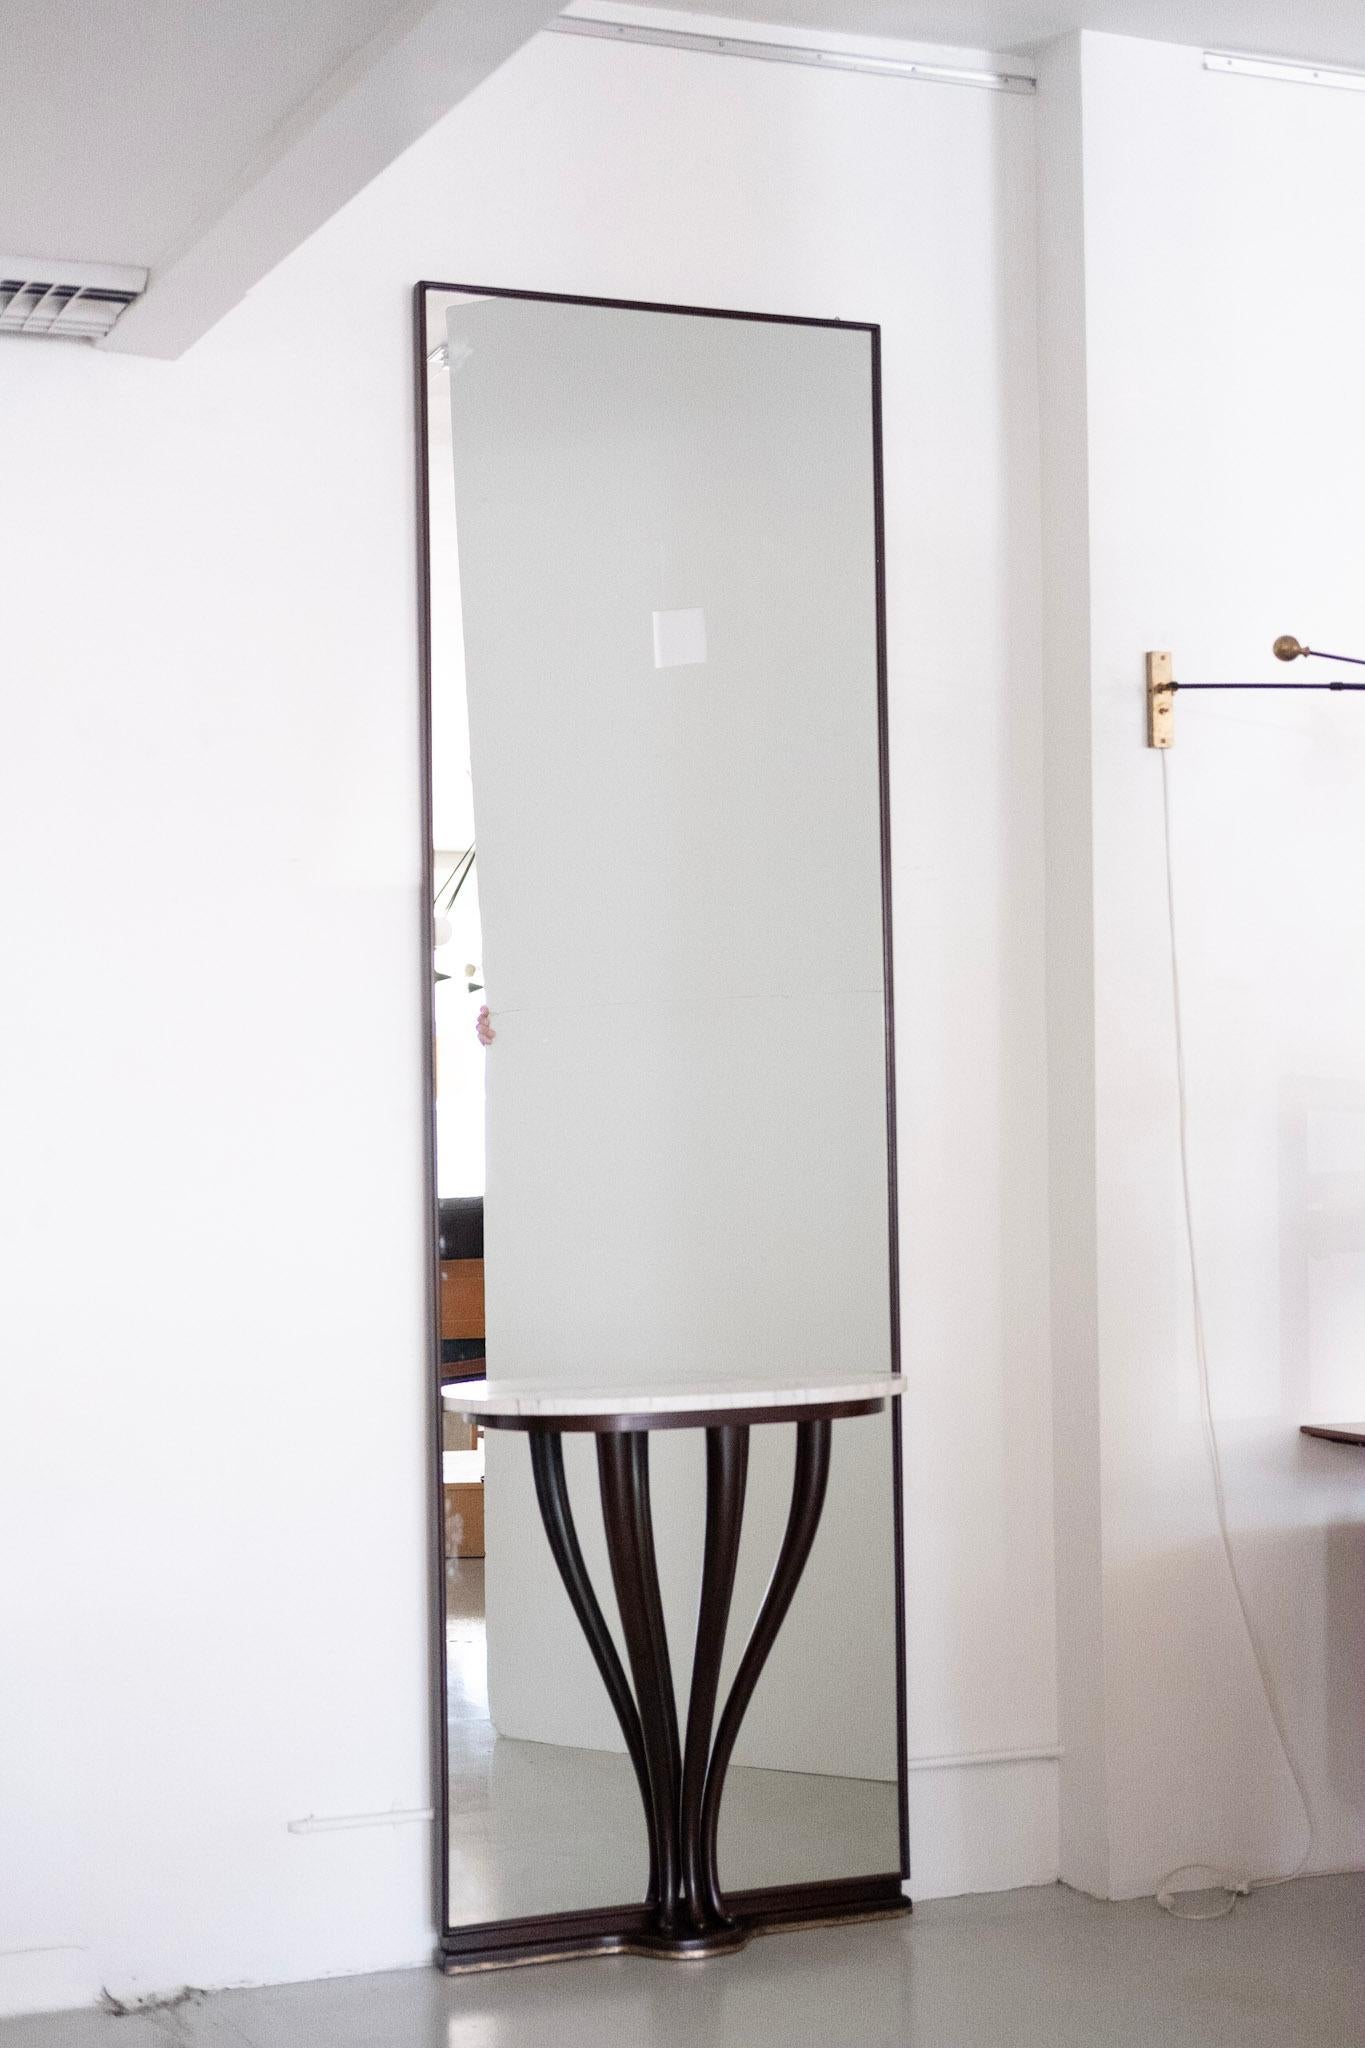 Stunning oversized floor mirror attributed to Fontana Arte.
Sculptural mahogany legs with Carrara marble tabletop and base has brass inlay.
Unique and impressive in size and scale.